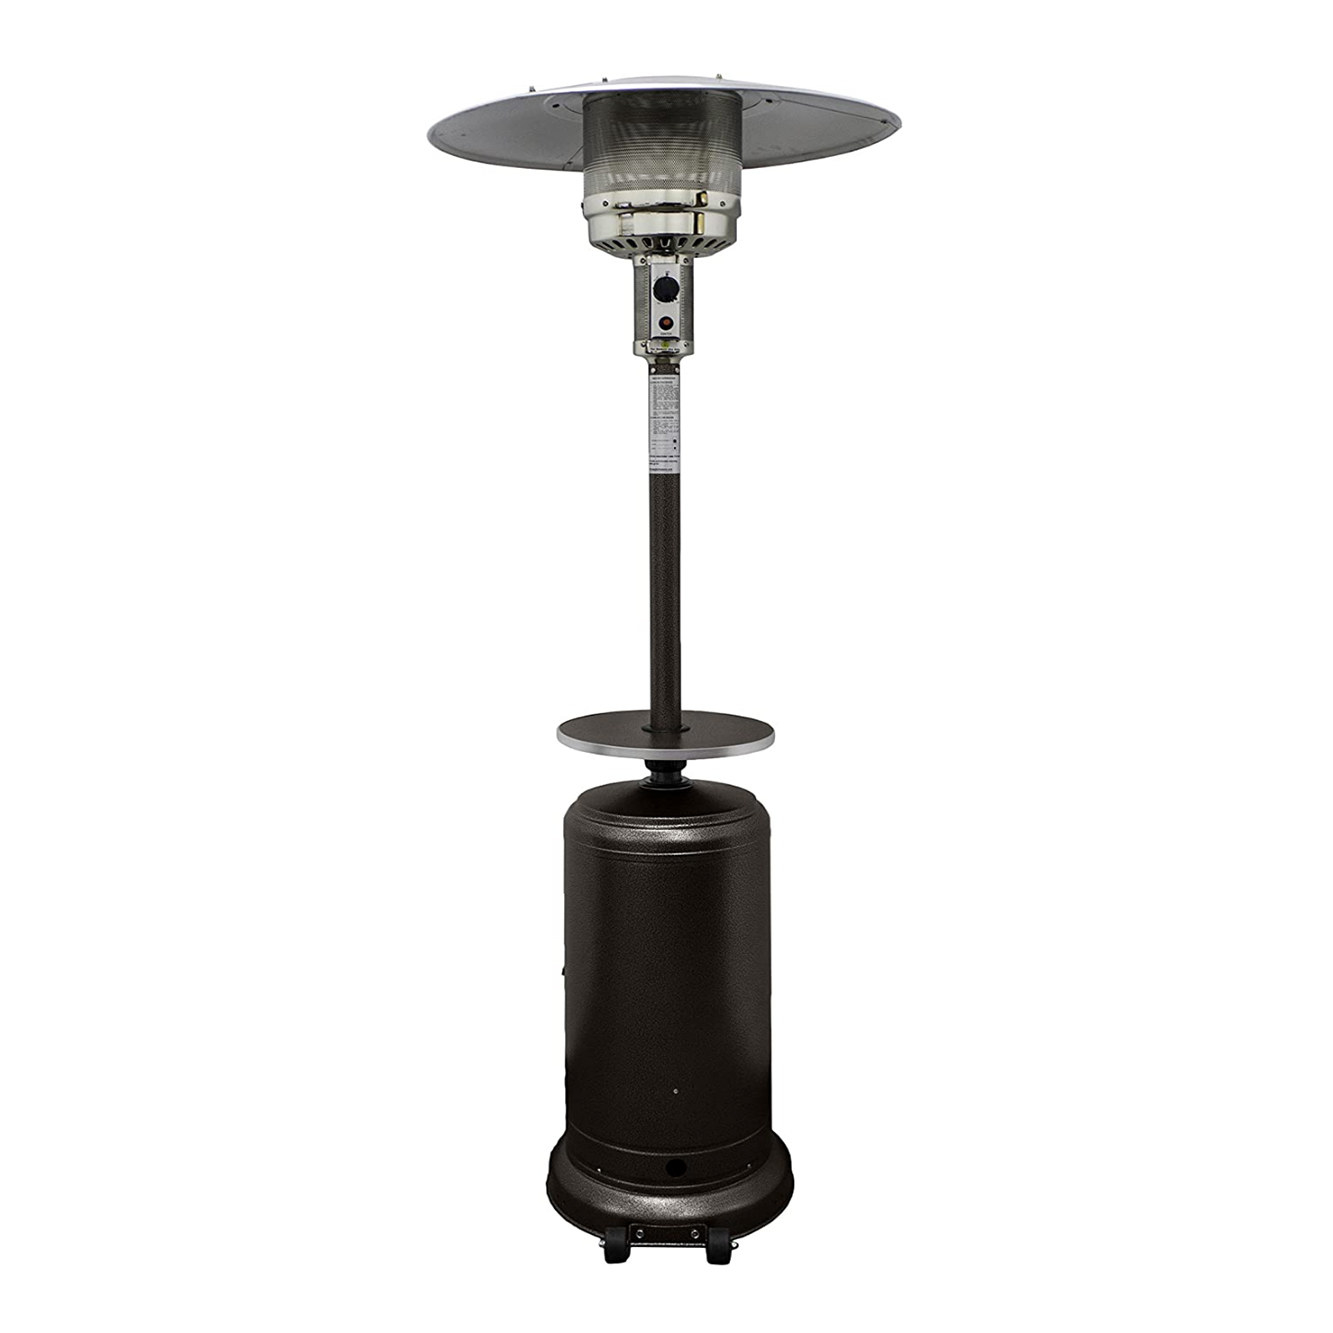 An image of a Hiland patio heater